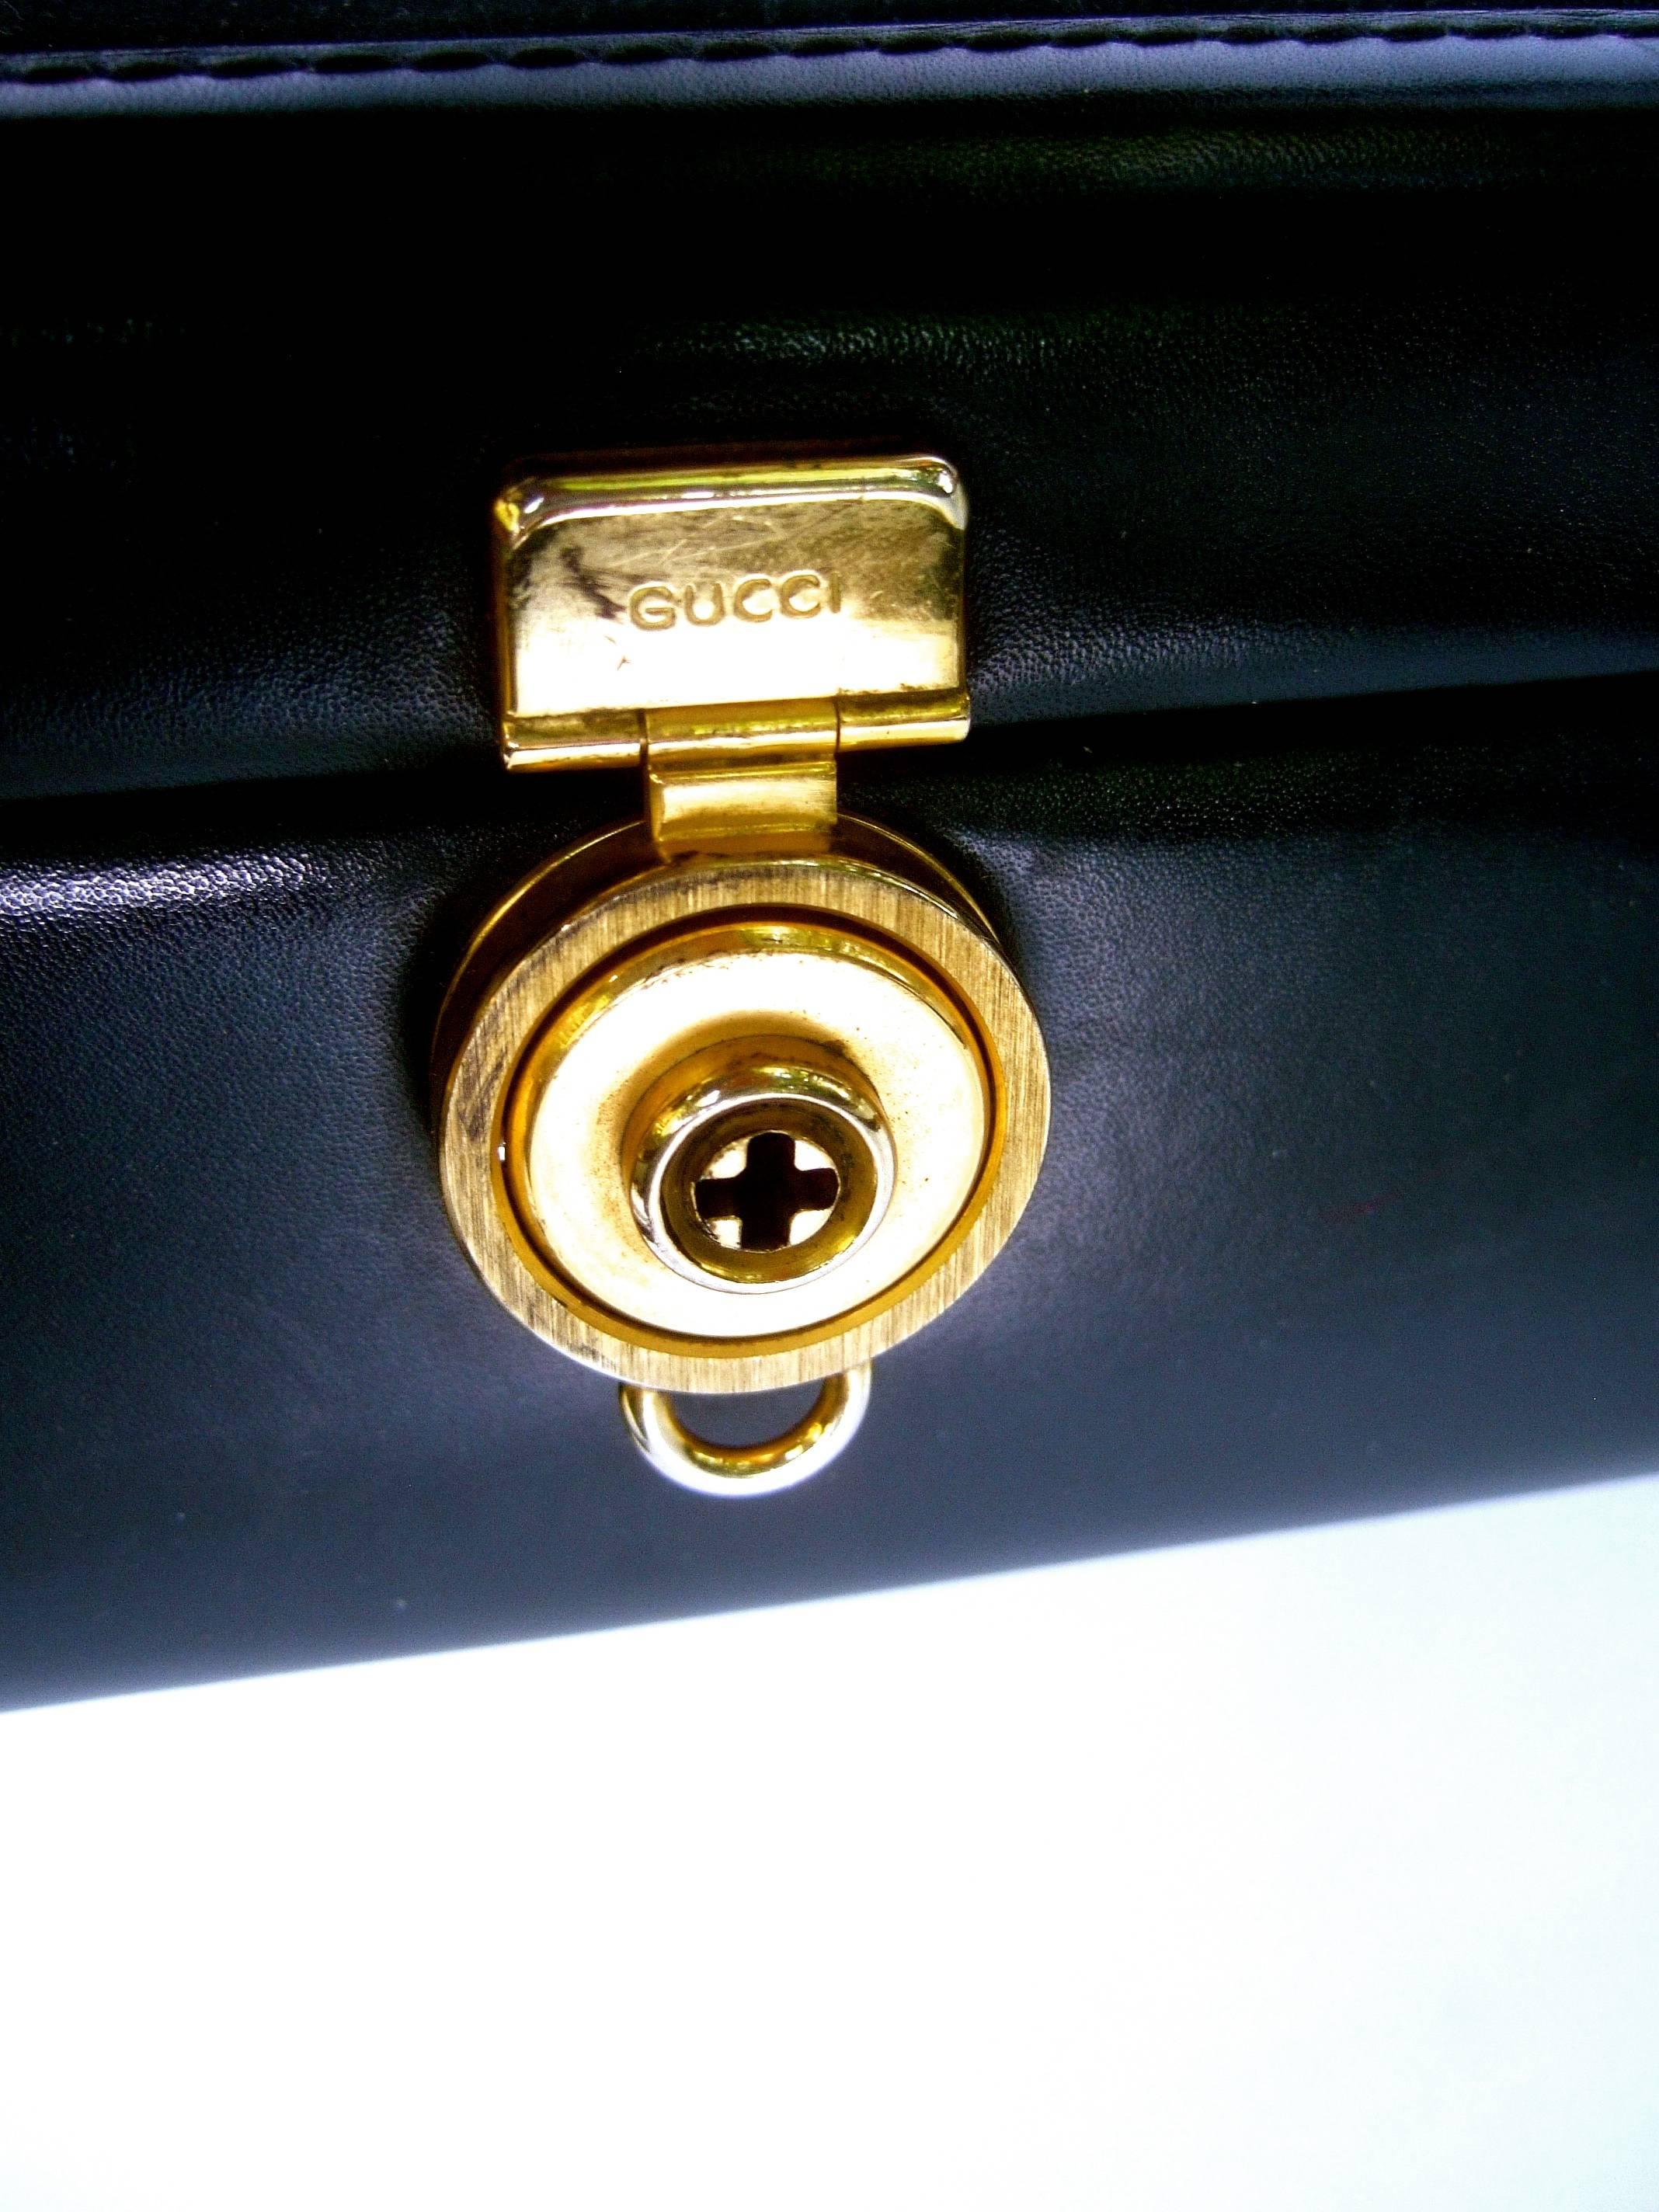 Gucci Luxurious Black Suede & Leather Briefcase circa 1970s 8